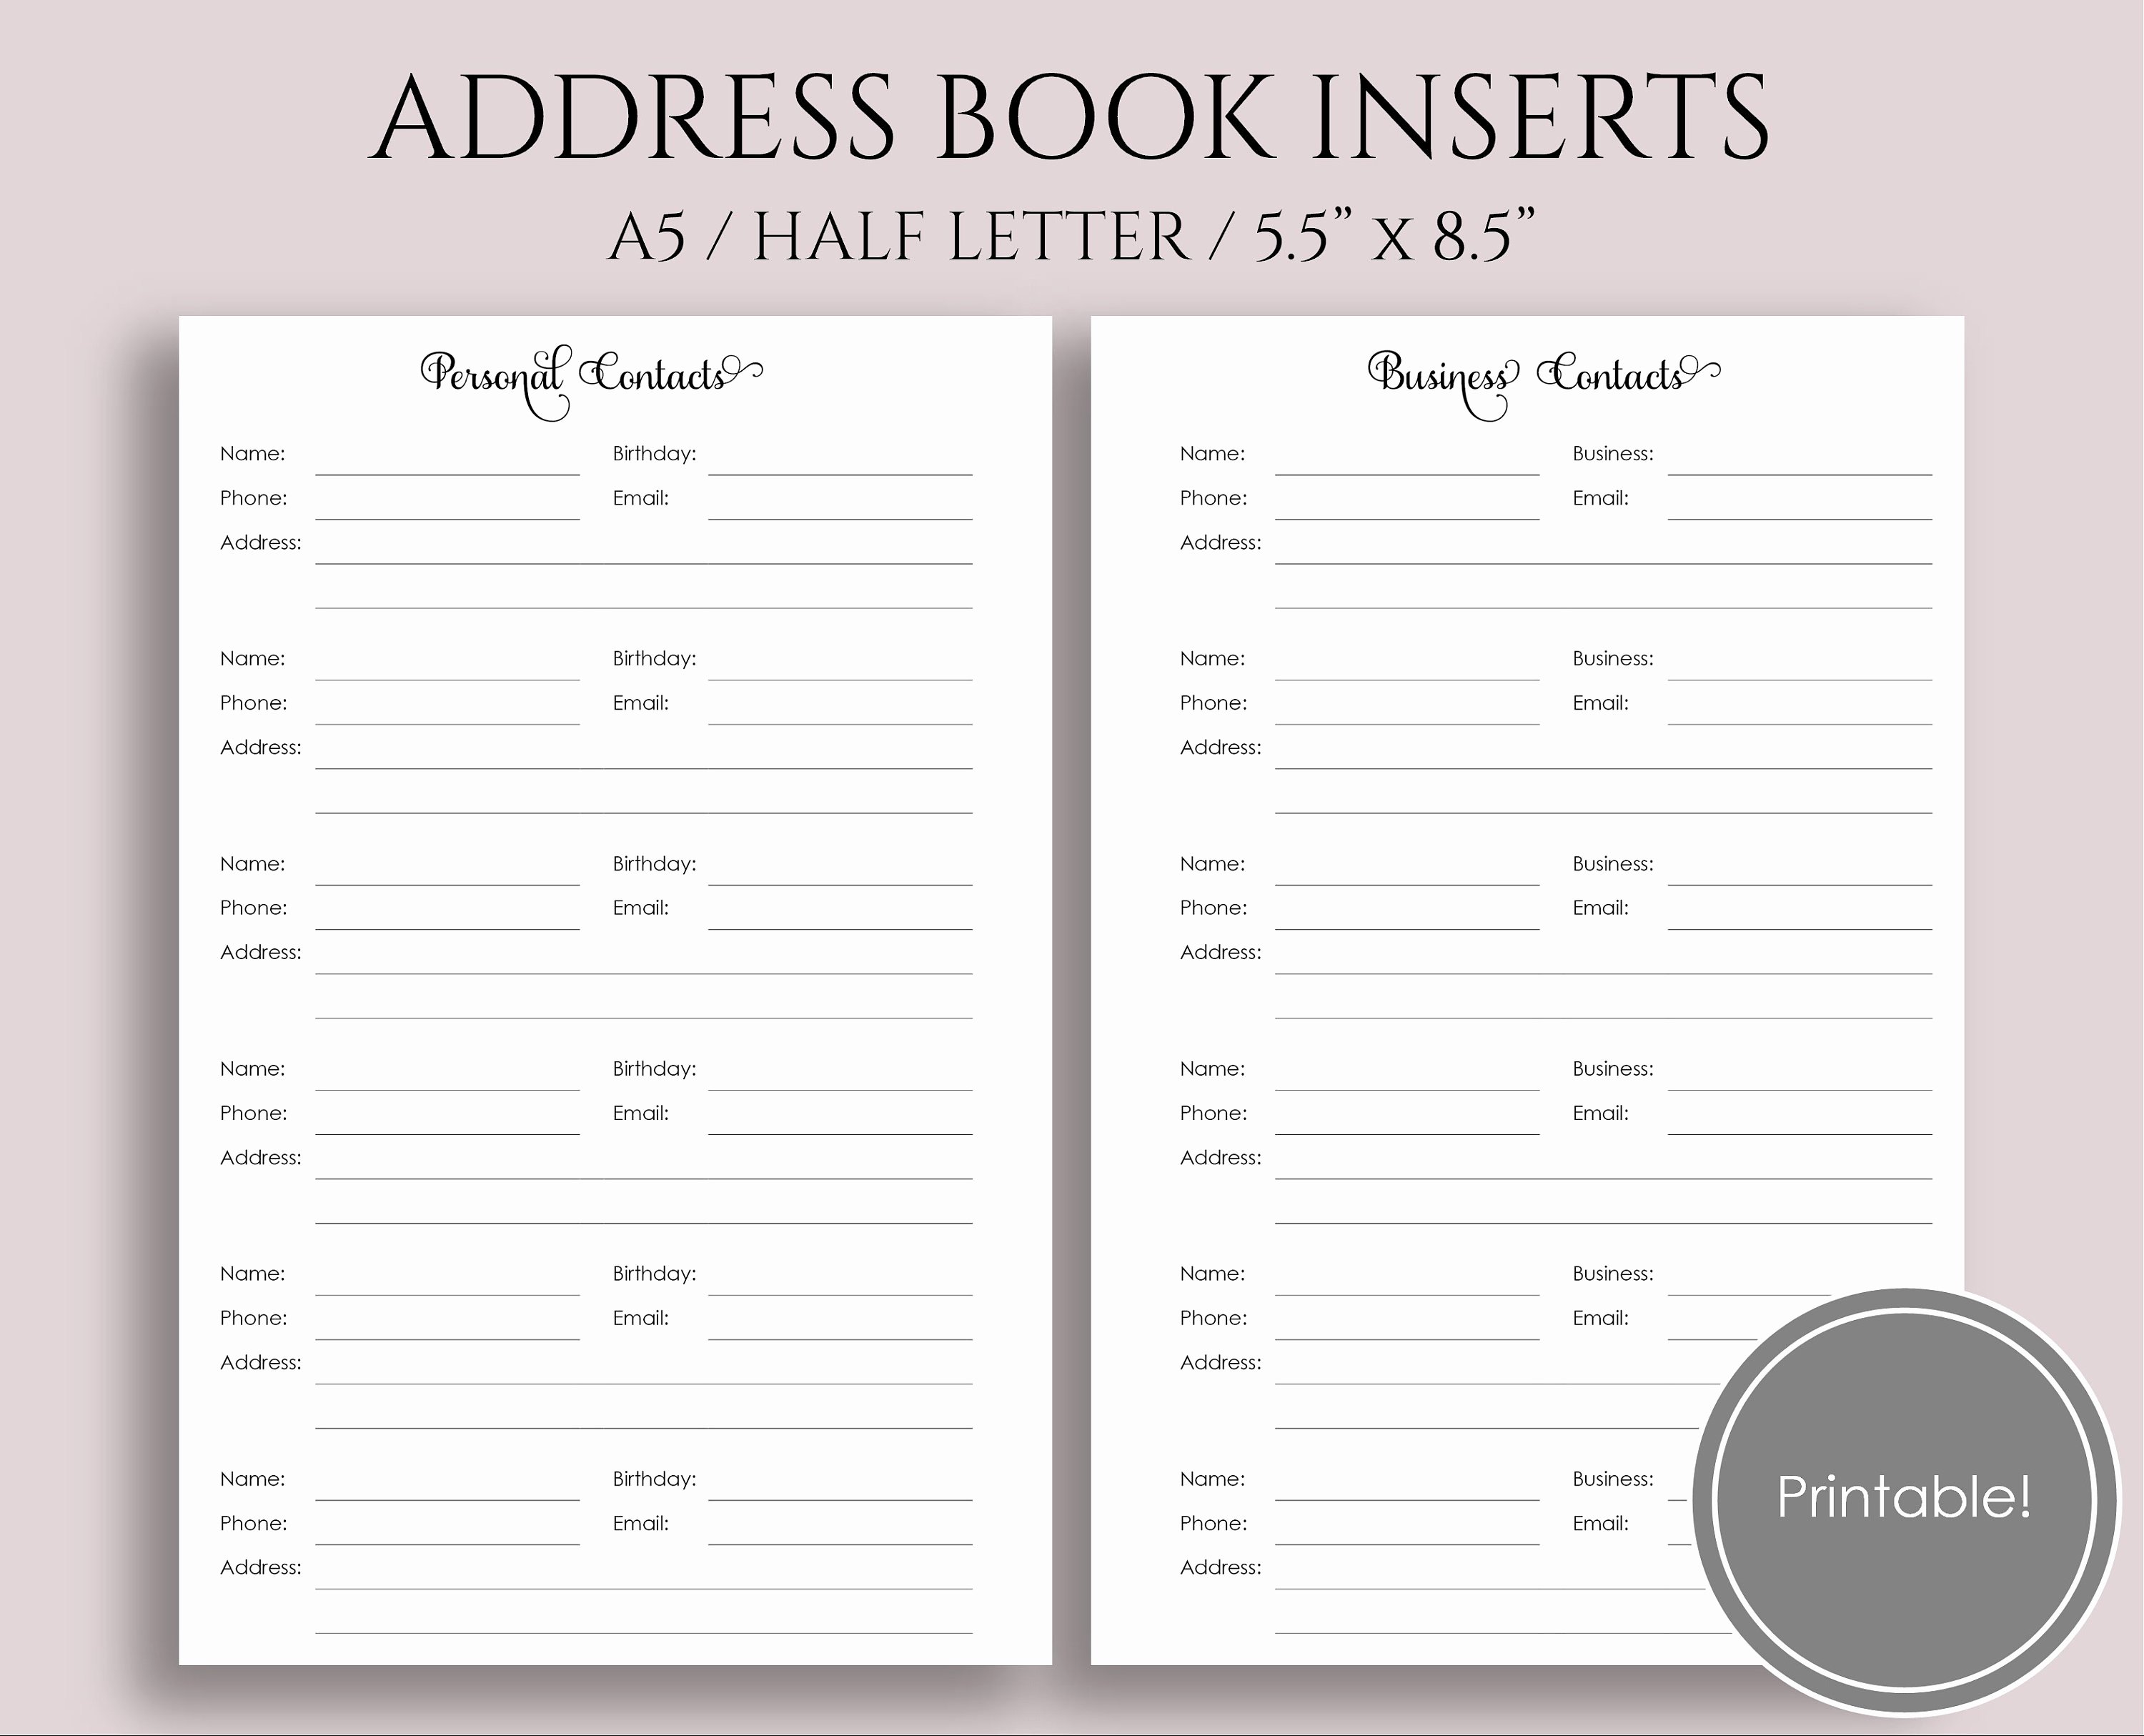 Free Printable Address Book Template Awesome Address Book Printable Planner Inserts Personal and